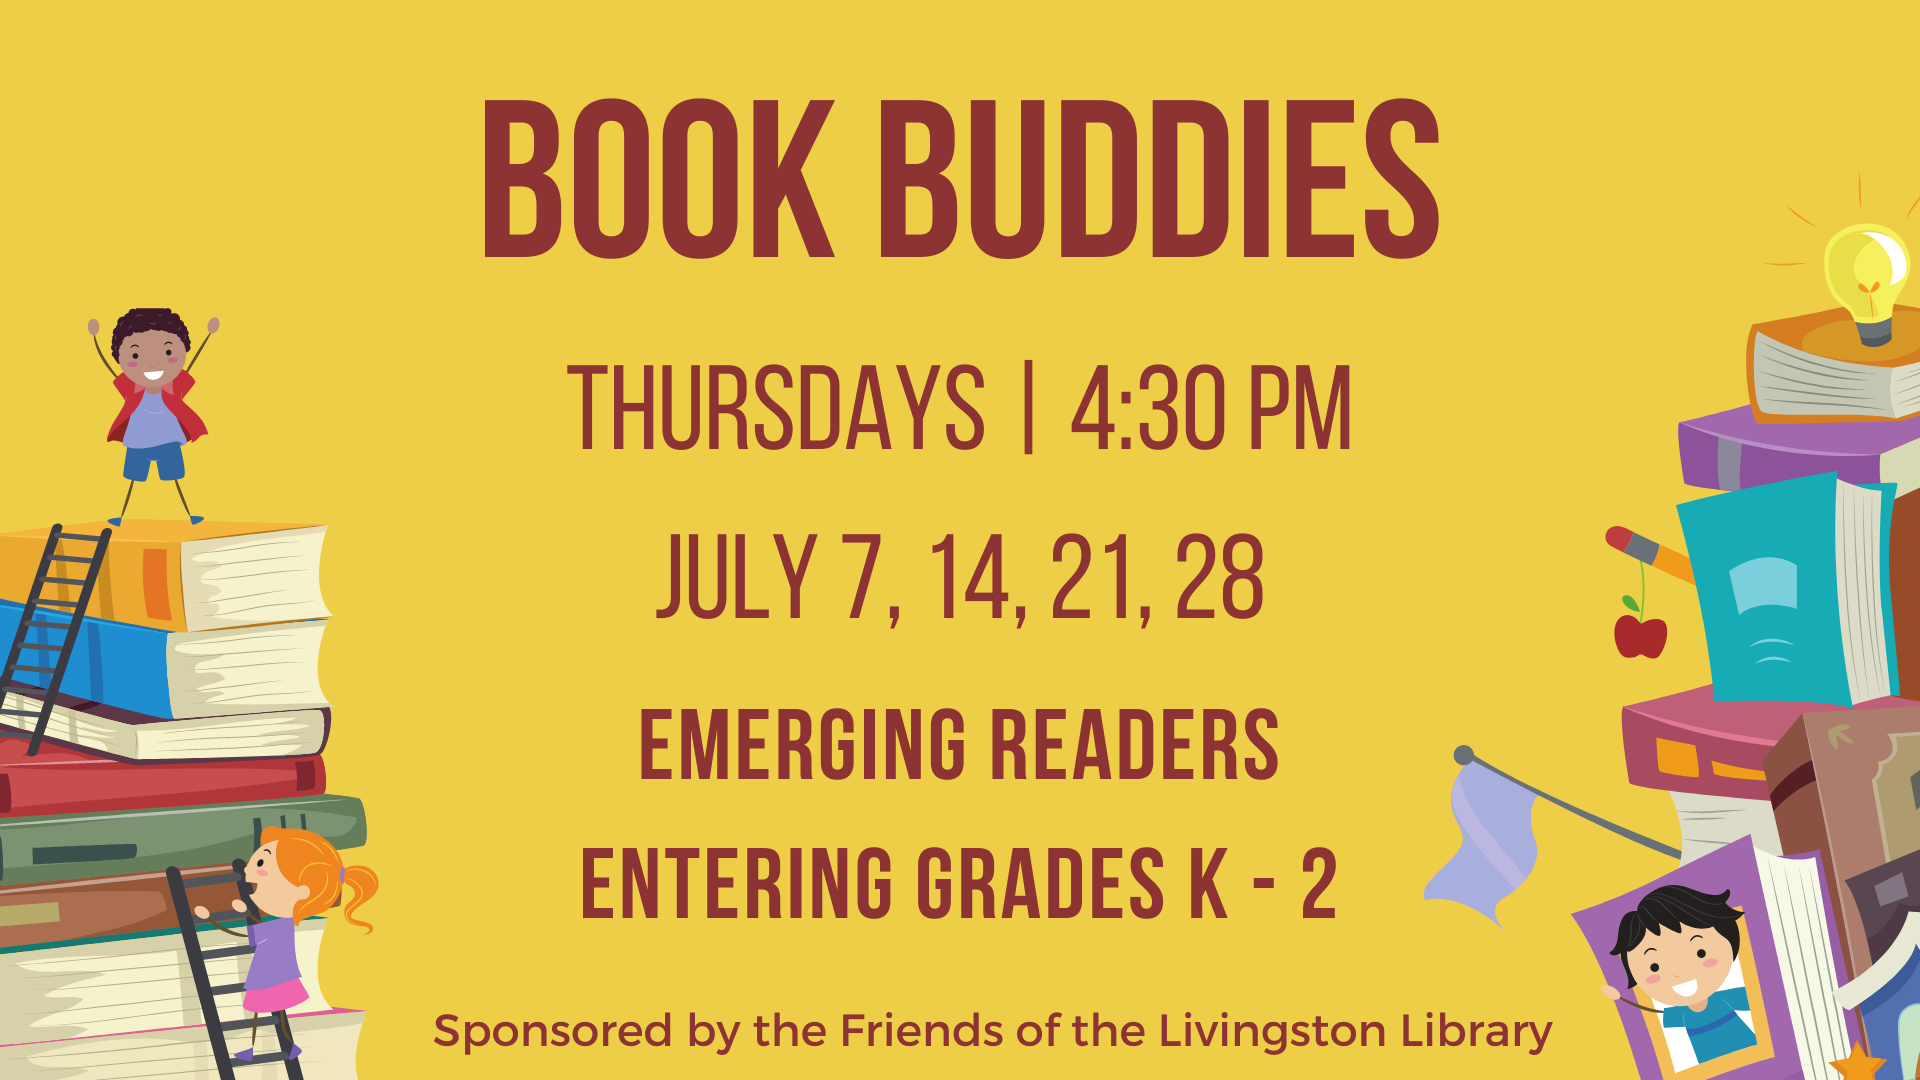 book buddies for emerging readers entering grades K to 2 in red text on a yellow background